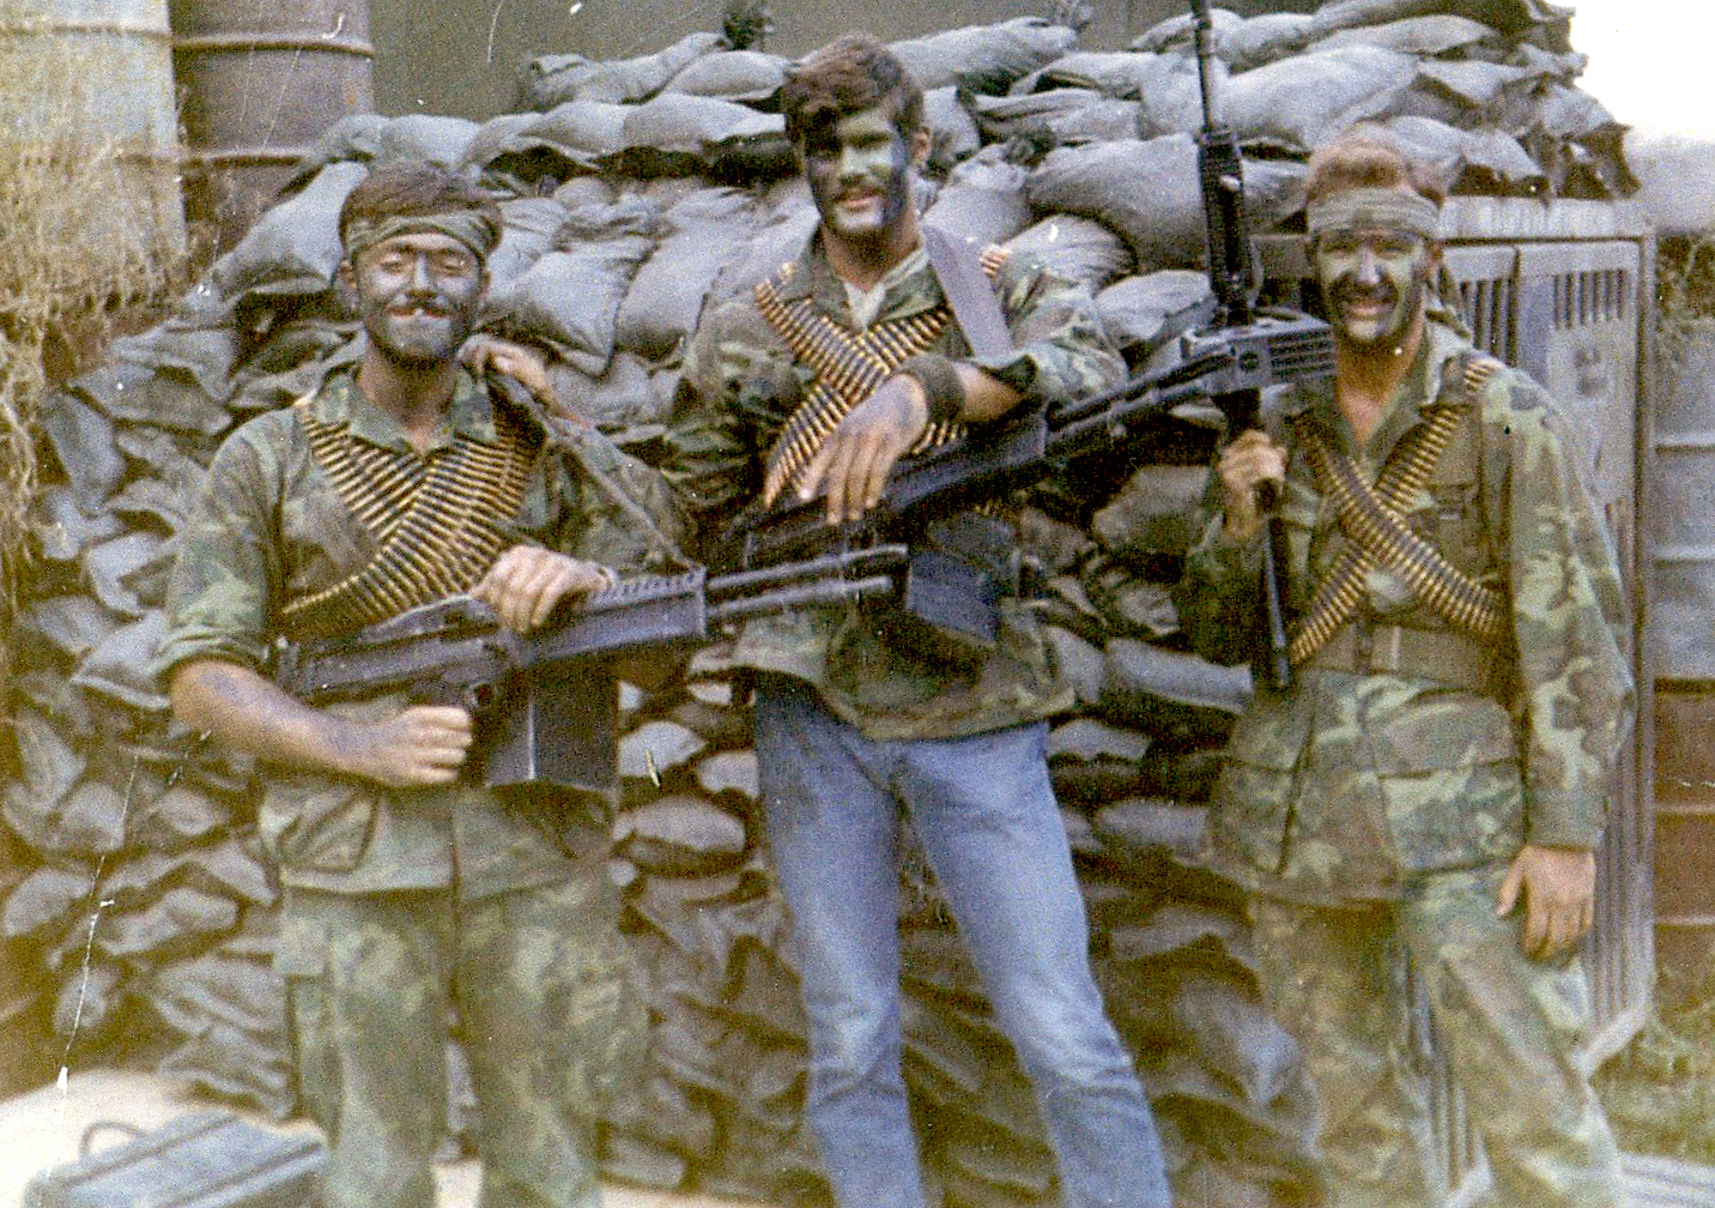 were any us coast guard members part of the navy seals during the vietnam war?